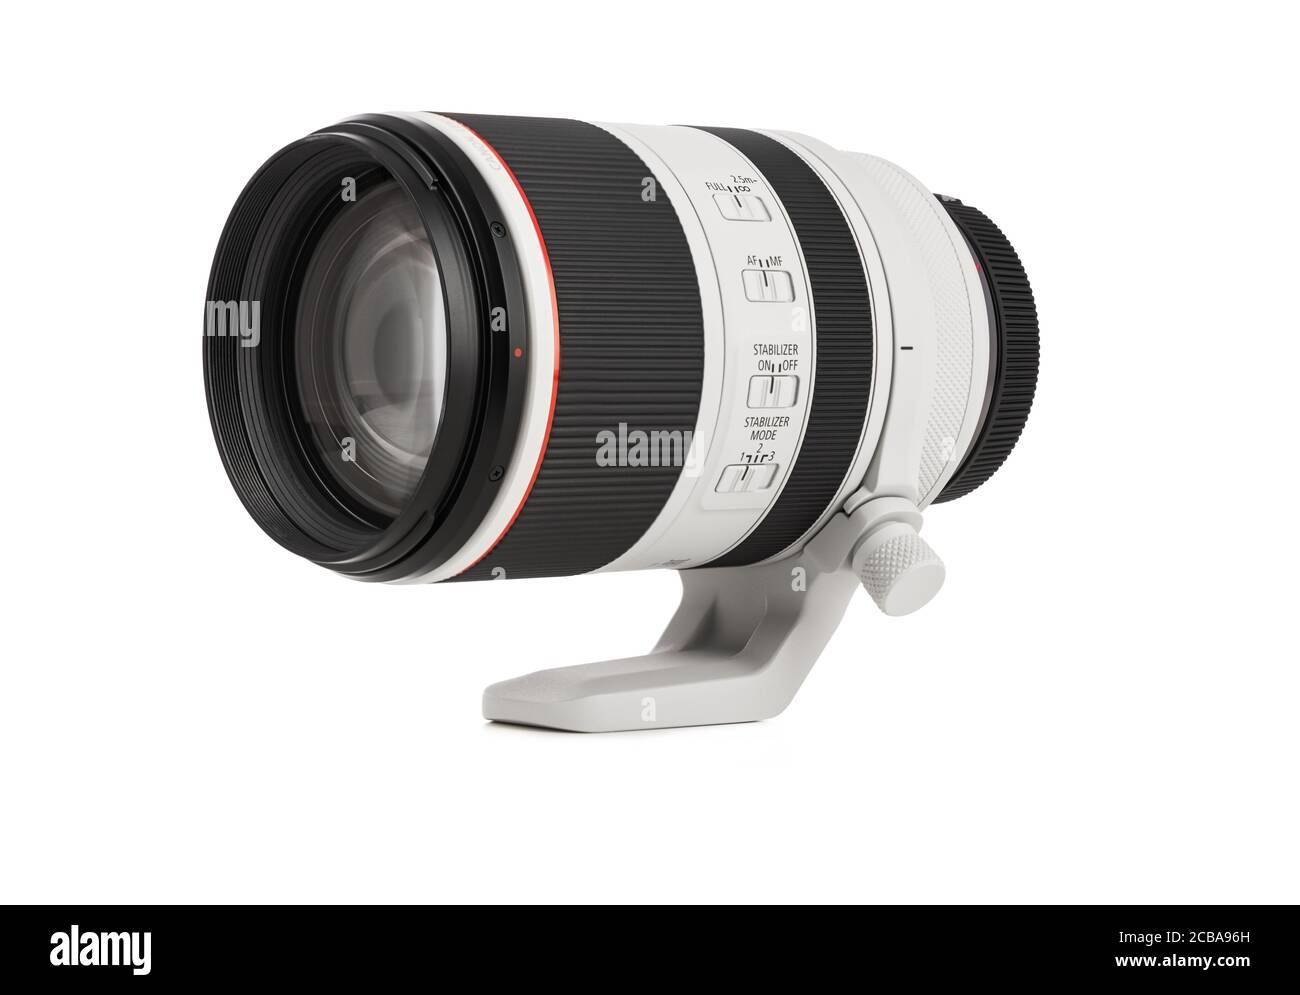 Varna, Bulgaria - August 05,2020: Image of  Canon RF 70-200mm f 2.8L IS USM Lens on a white background. Canon is the world largest SLR camera manufact Stock Photo